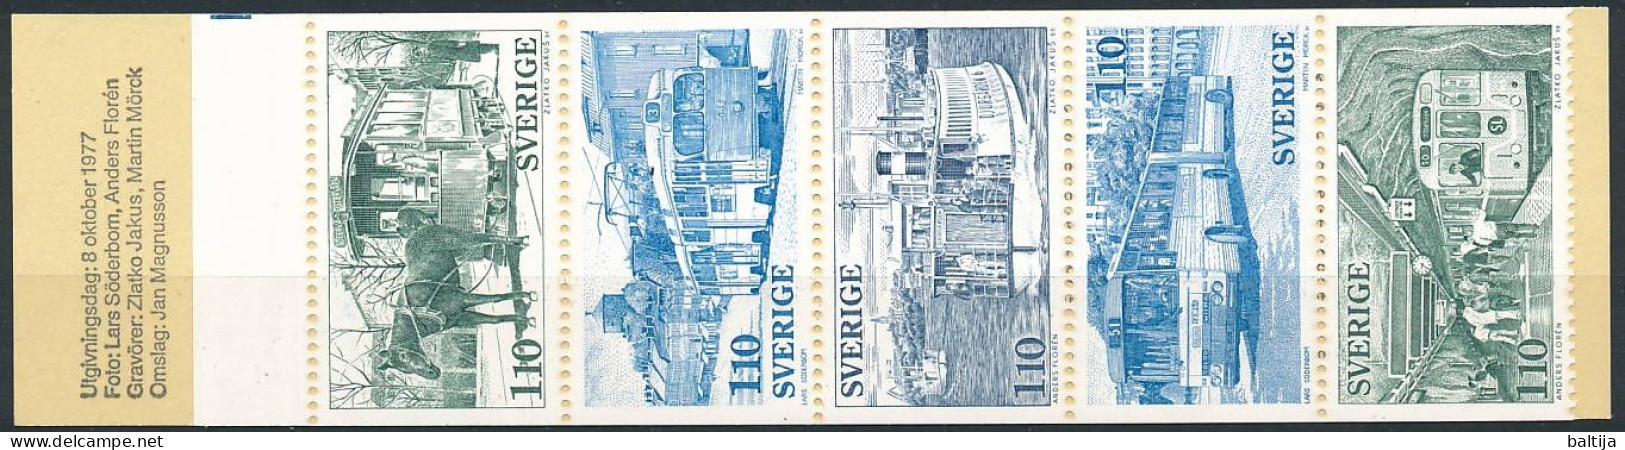 H.302 Booklet ** MNH / Public Transport, Horse Tram, Ferry, Bus, Subway - Other (Earth)